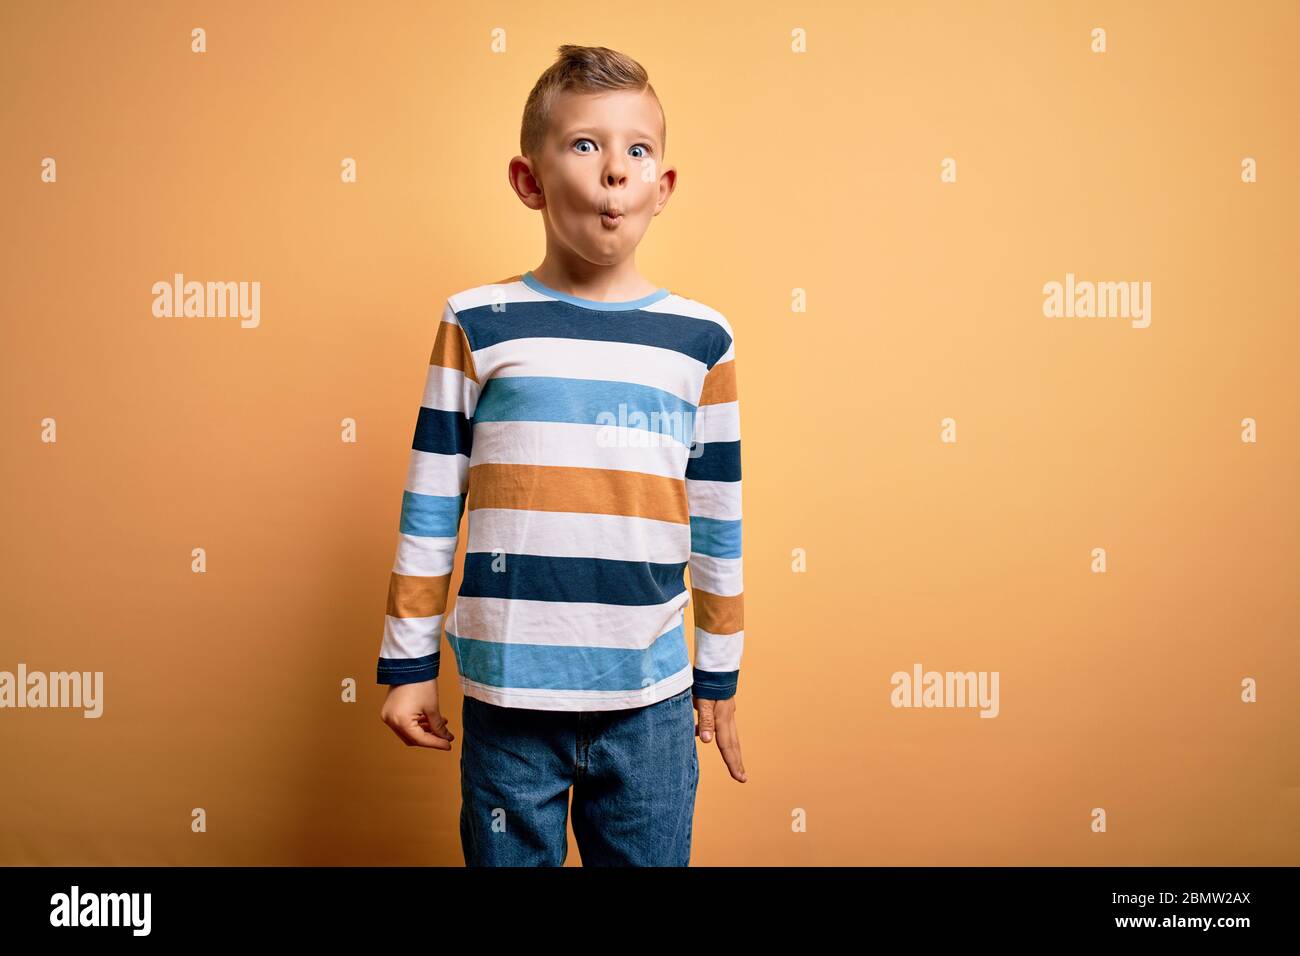 Teenager boy wearing yellow t-shirt over isolated background making fish  face with lips, crazy and comical gesture. Funny expression Stock Photo -  Alamy